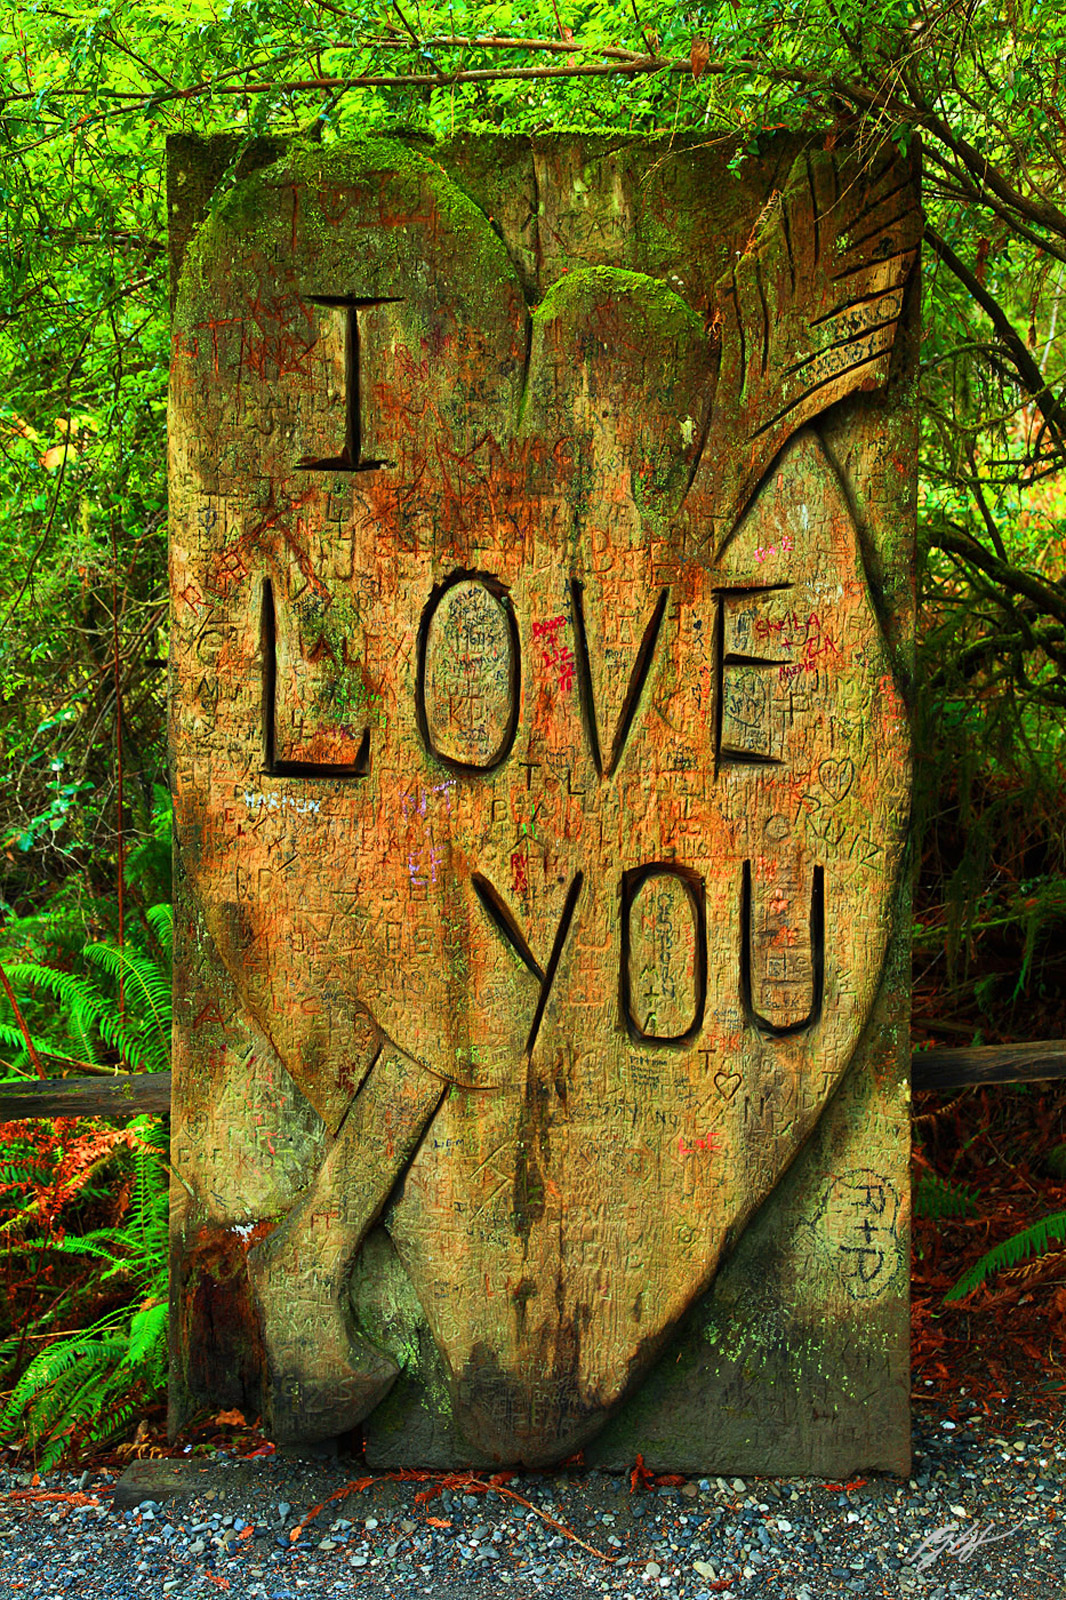 "I Love You" Giant Chainsaw Carving in the Trees of Mystery in the Redwoods in California